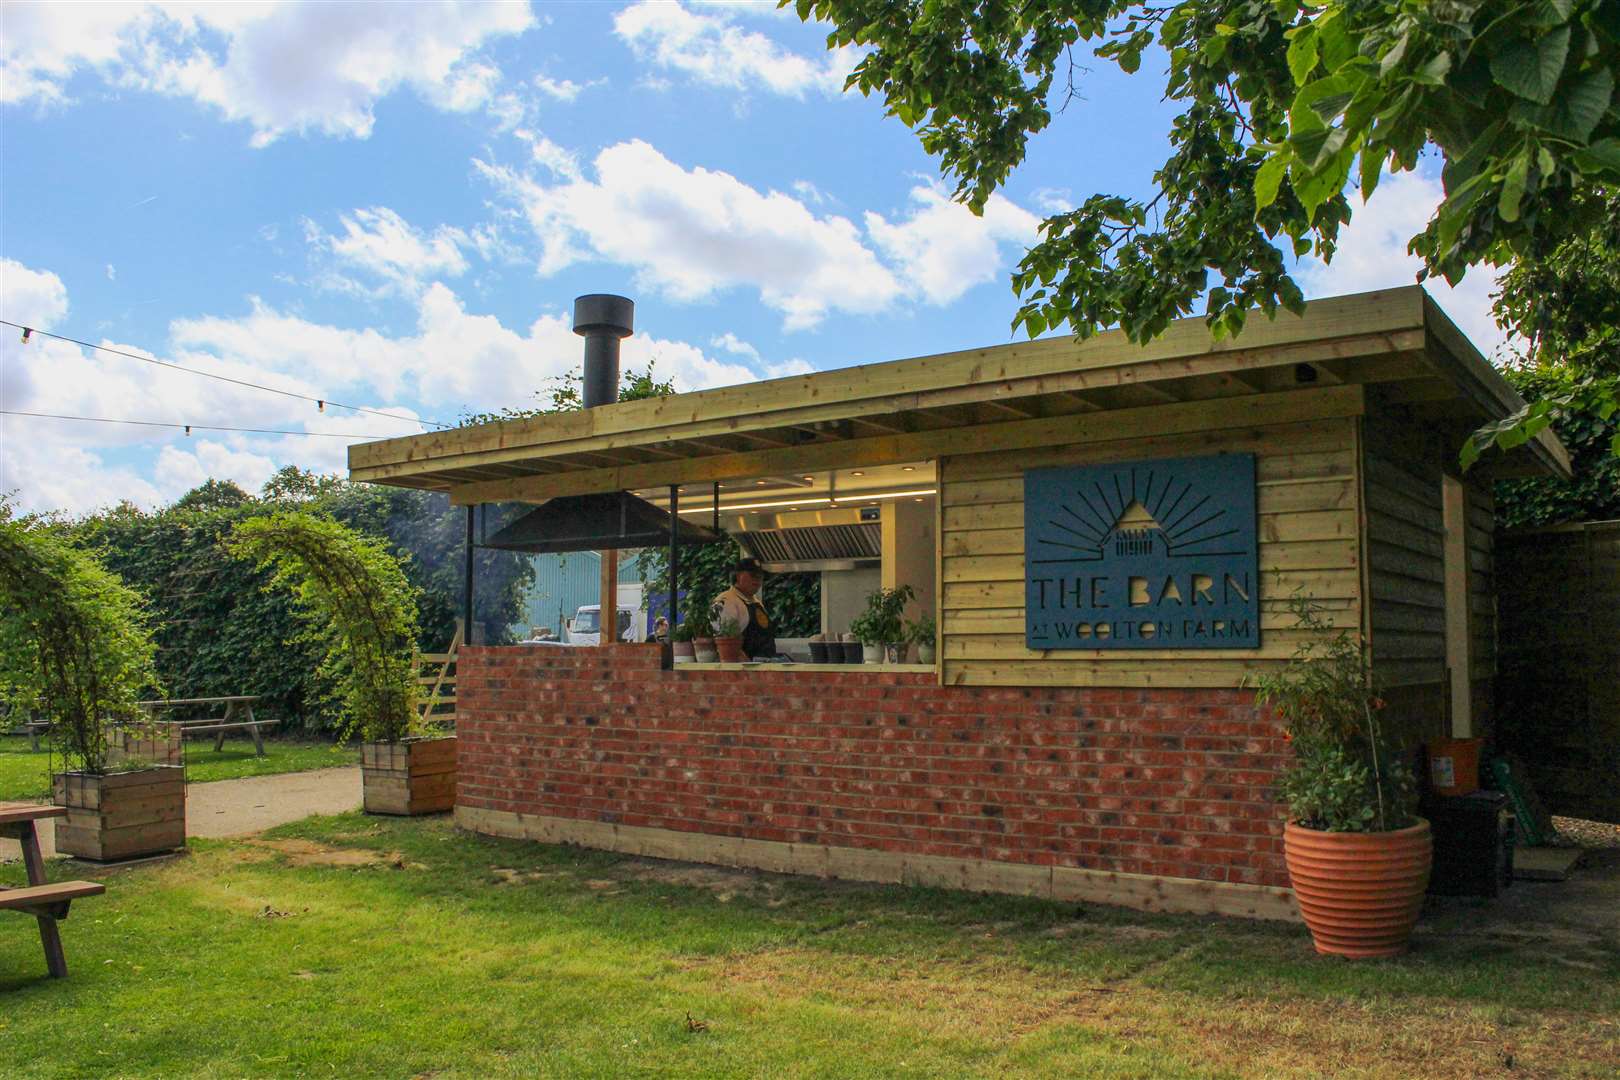 The new Saffu Bru dining experience is open this summer at Woolton Farm in Bekesbourne. Picture: Woolton Farm